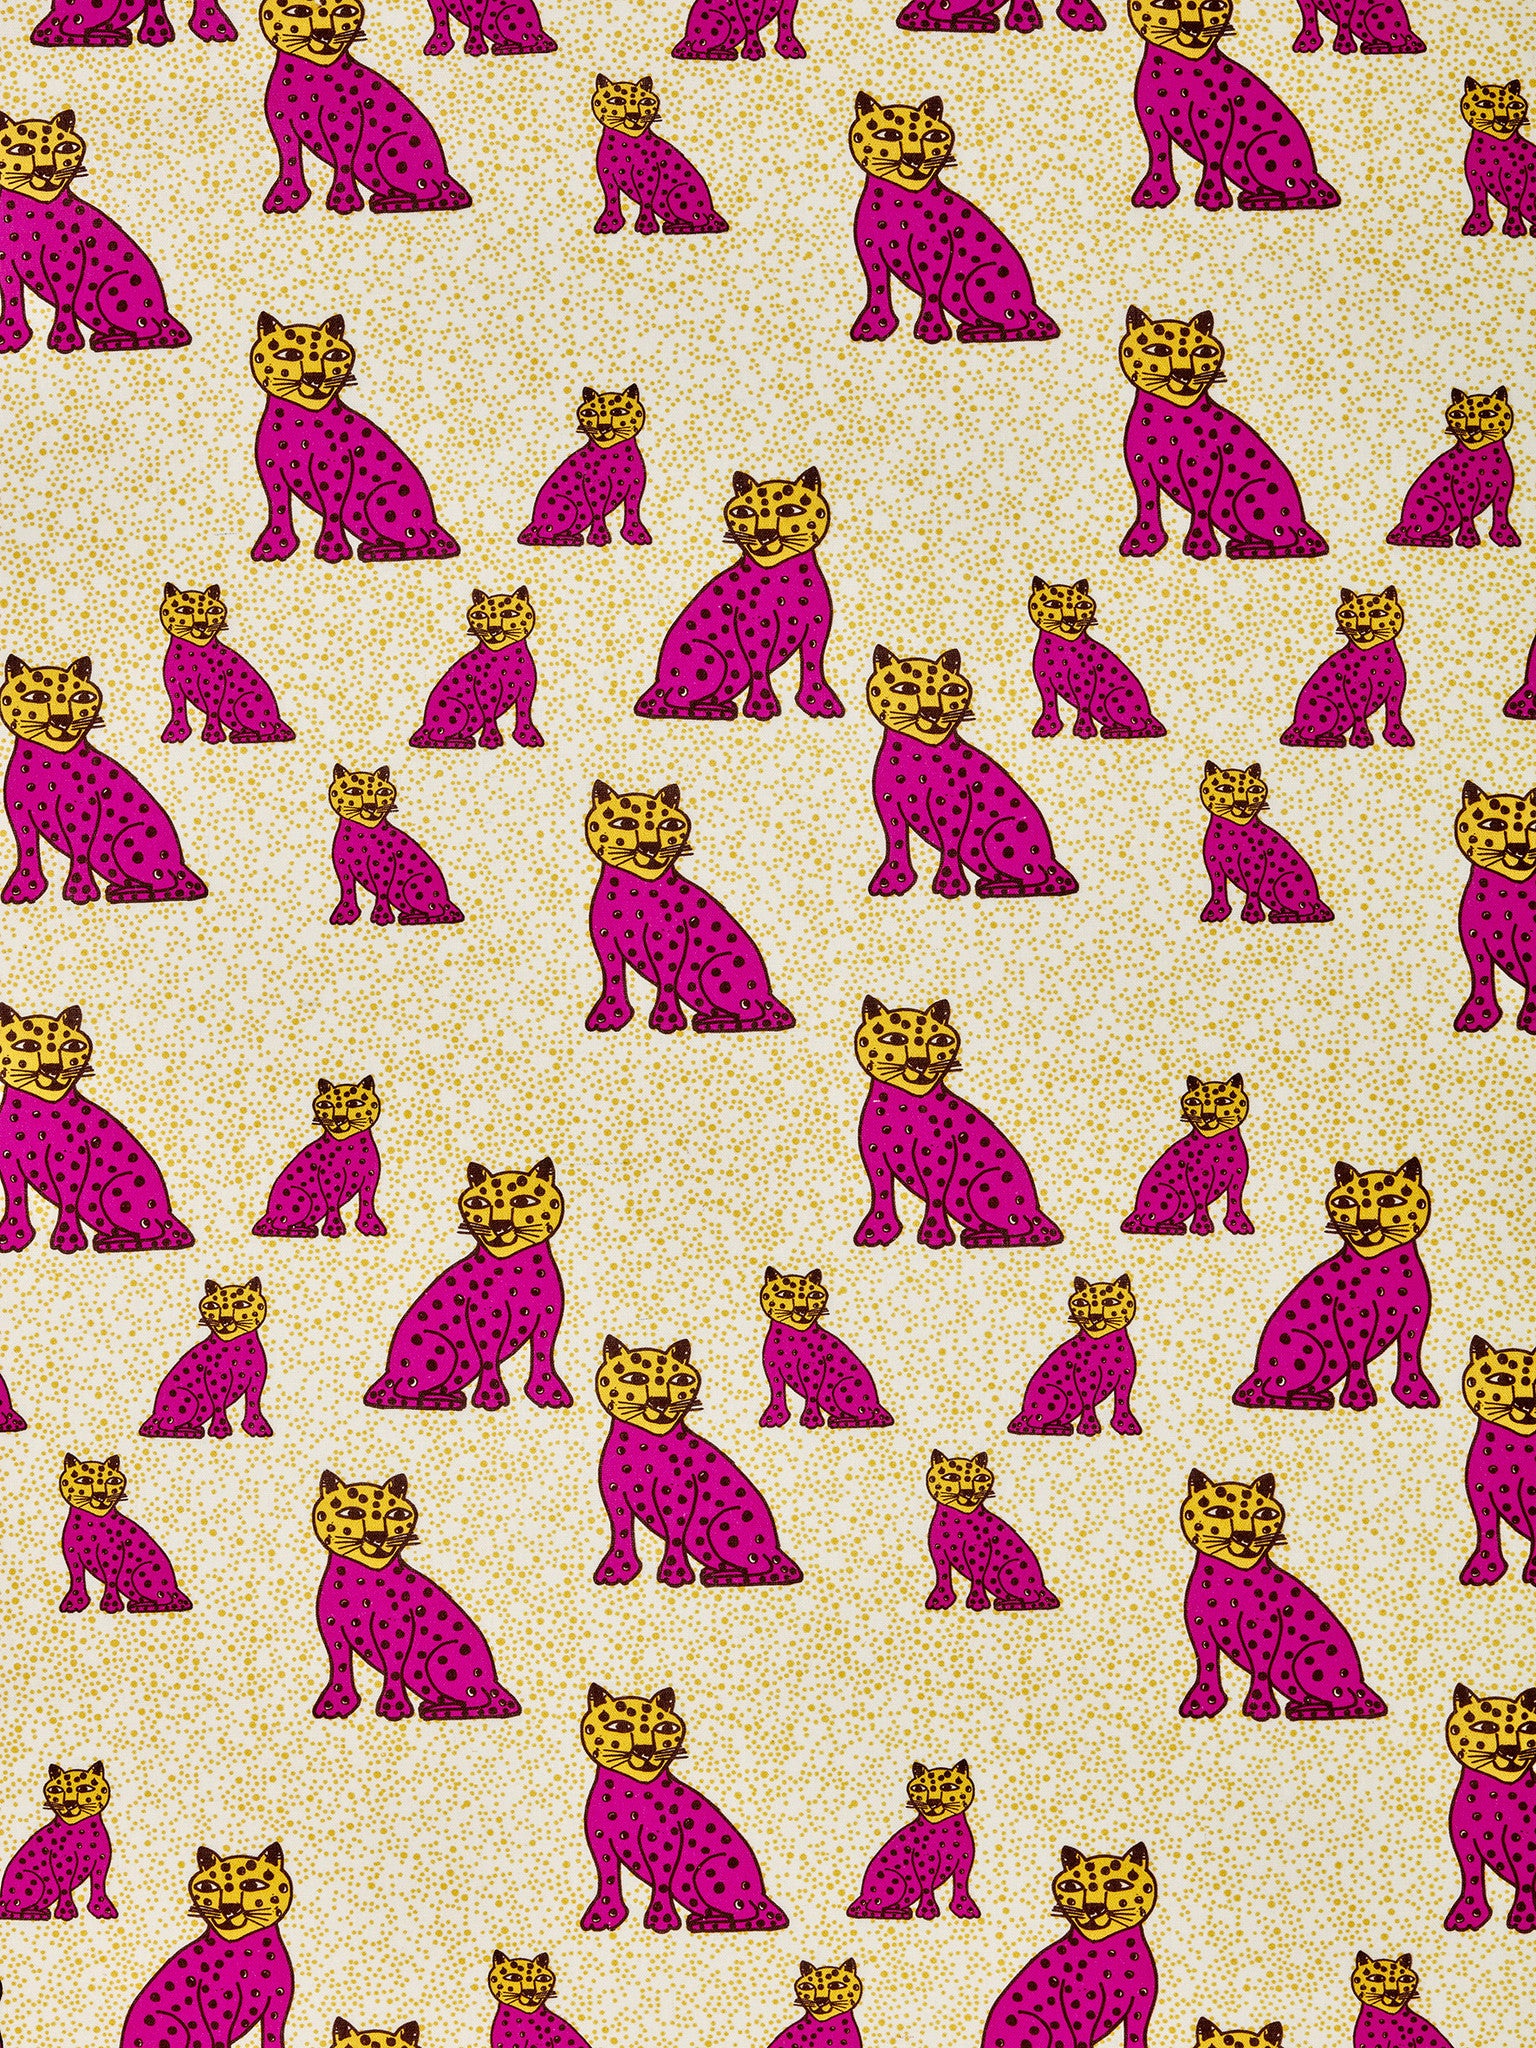 Leopard Patterned Linen Home Decor Fabric in Fuchsia Pink & Yellow